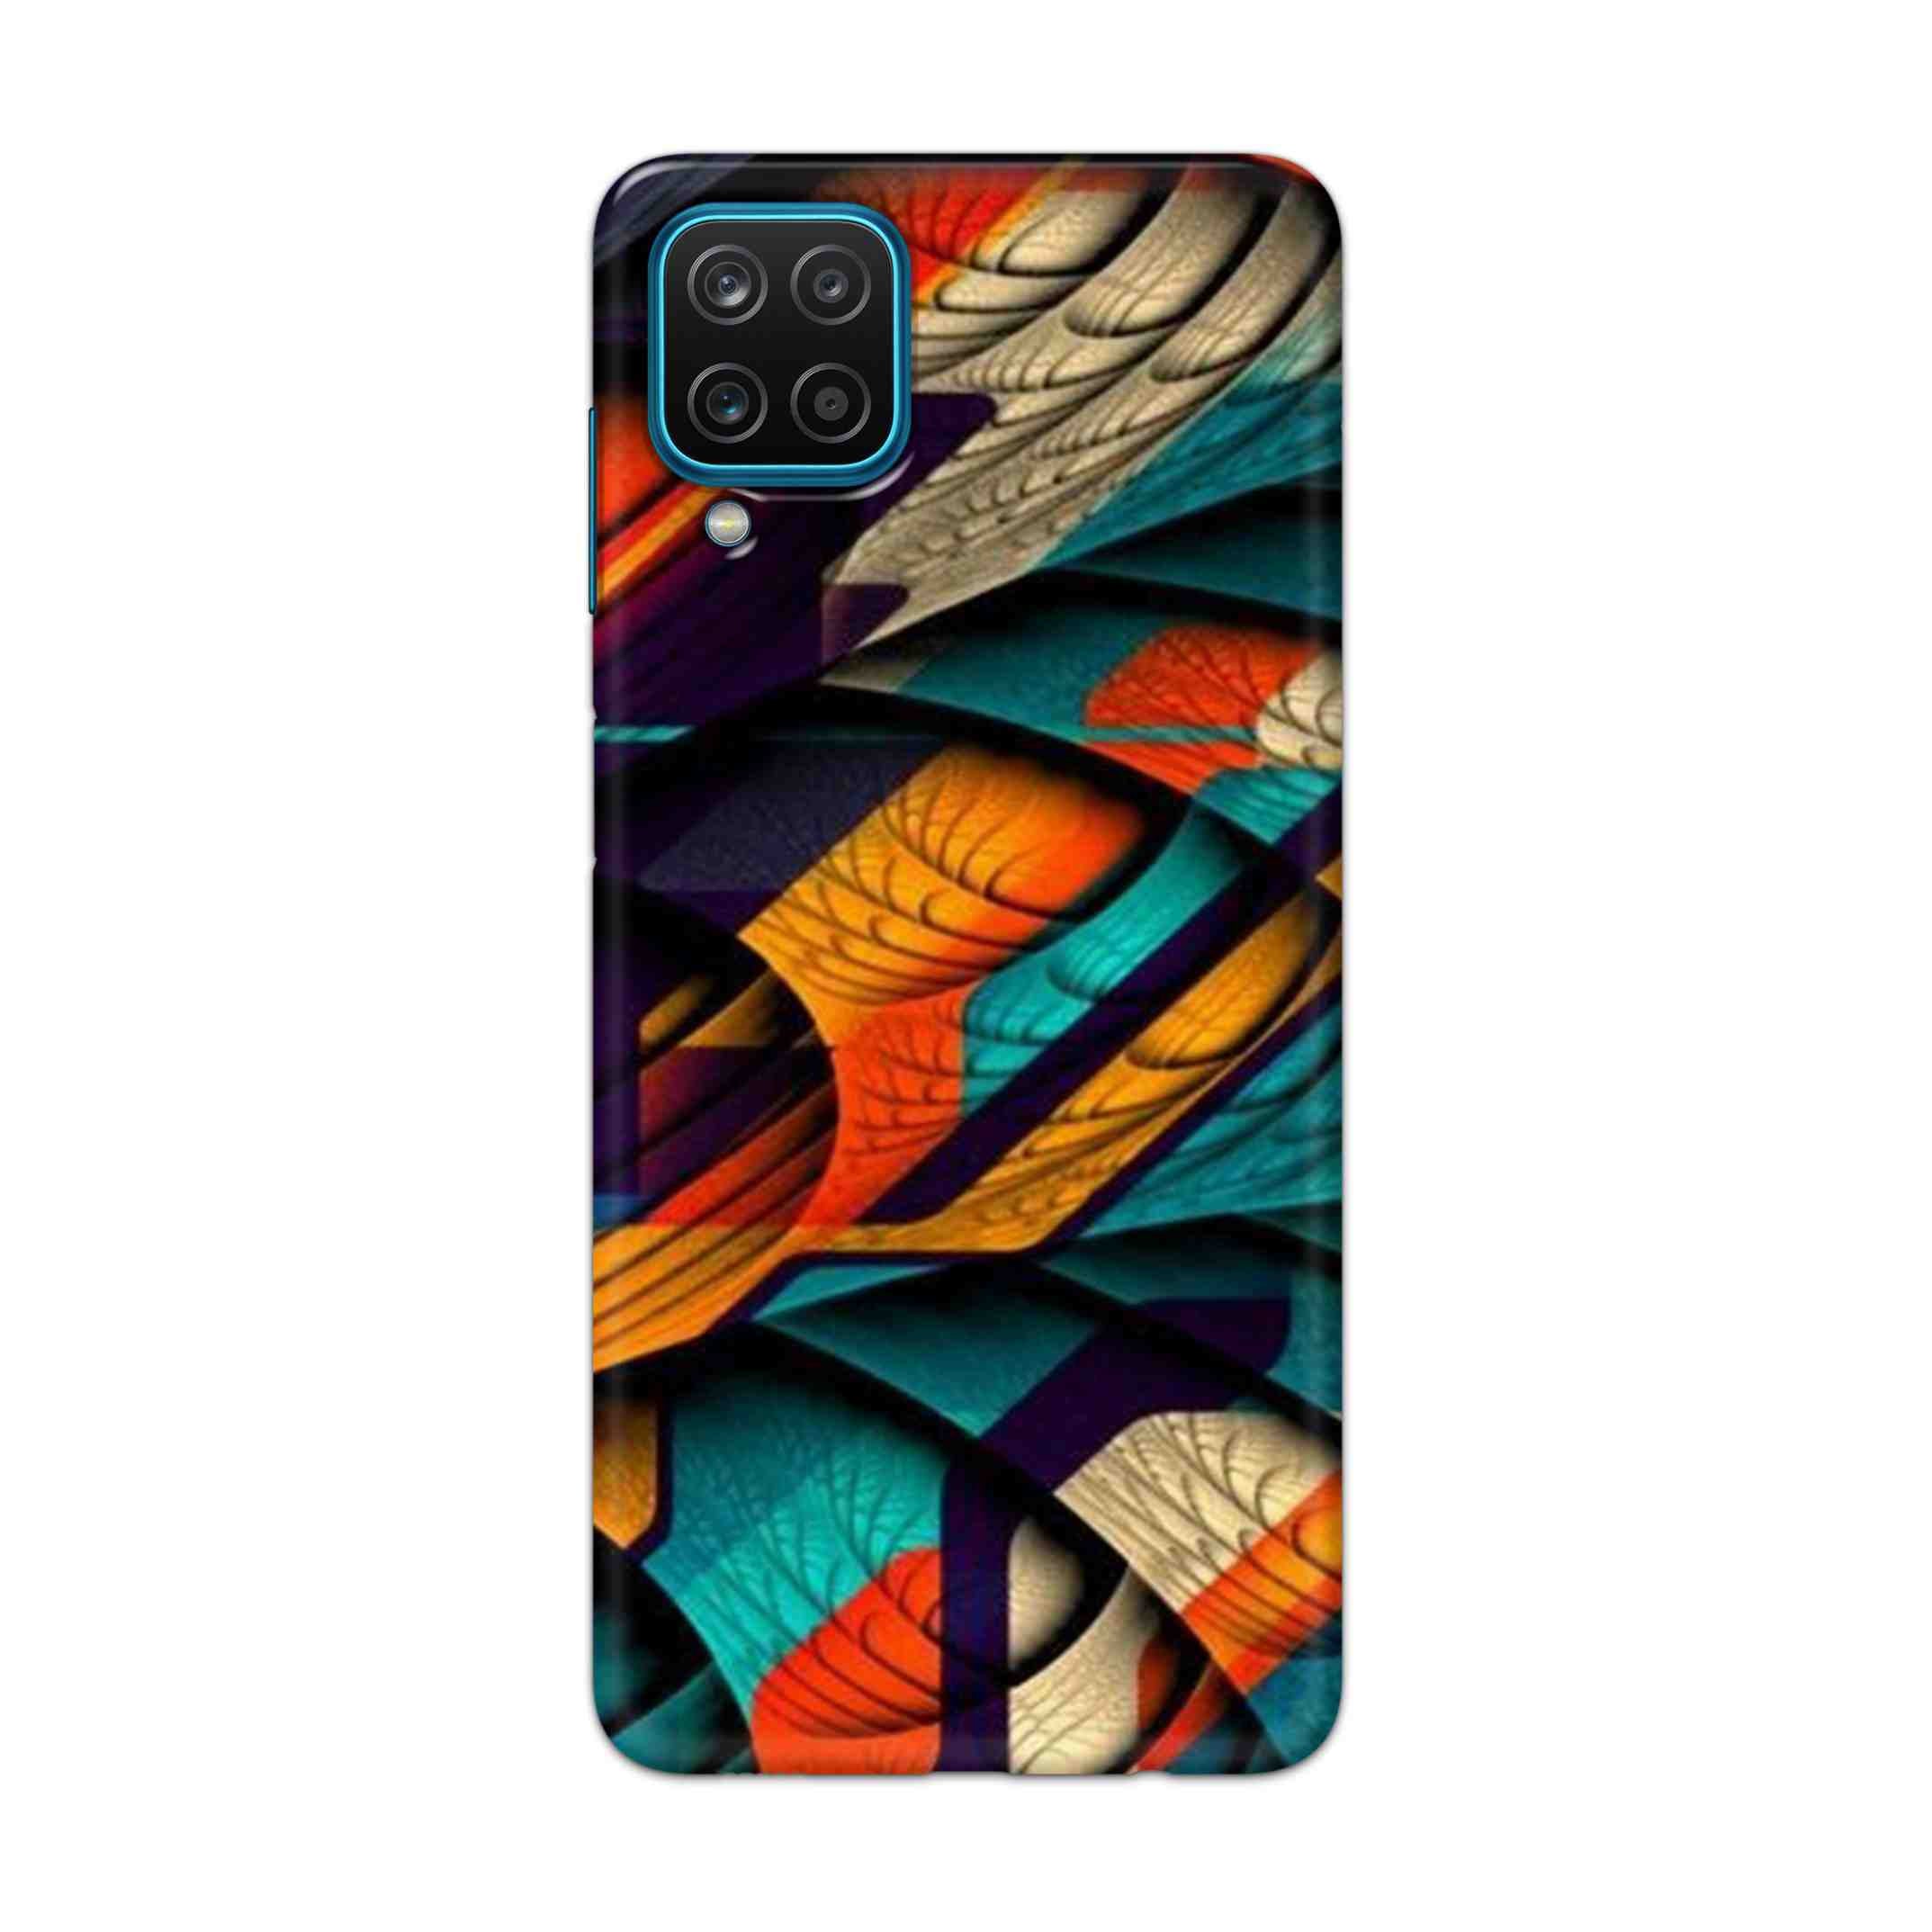 Buy Colour Abstract Hard Back Mobile Phone Case Cover For Samsung Galaxy A12 Online